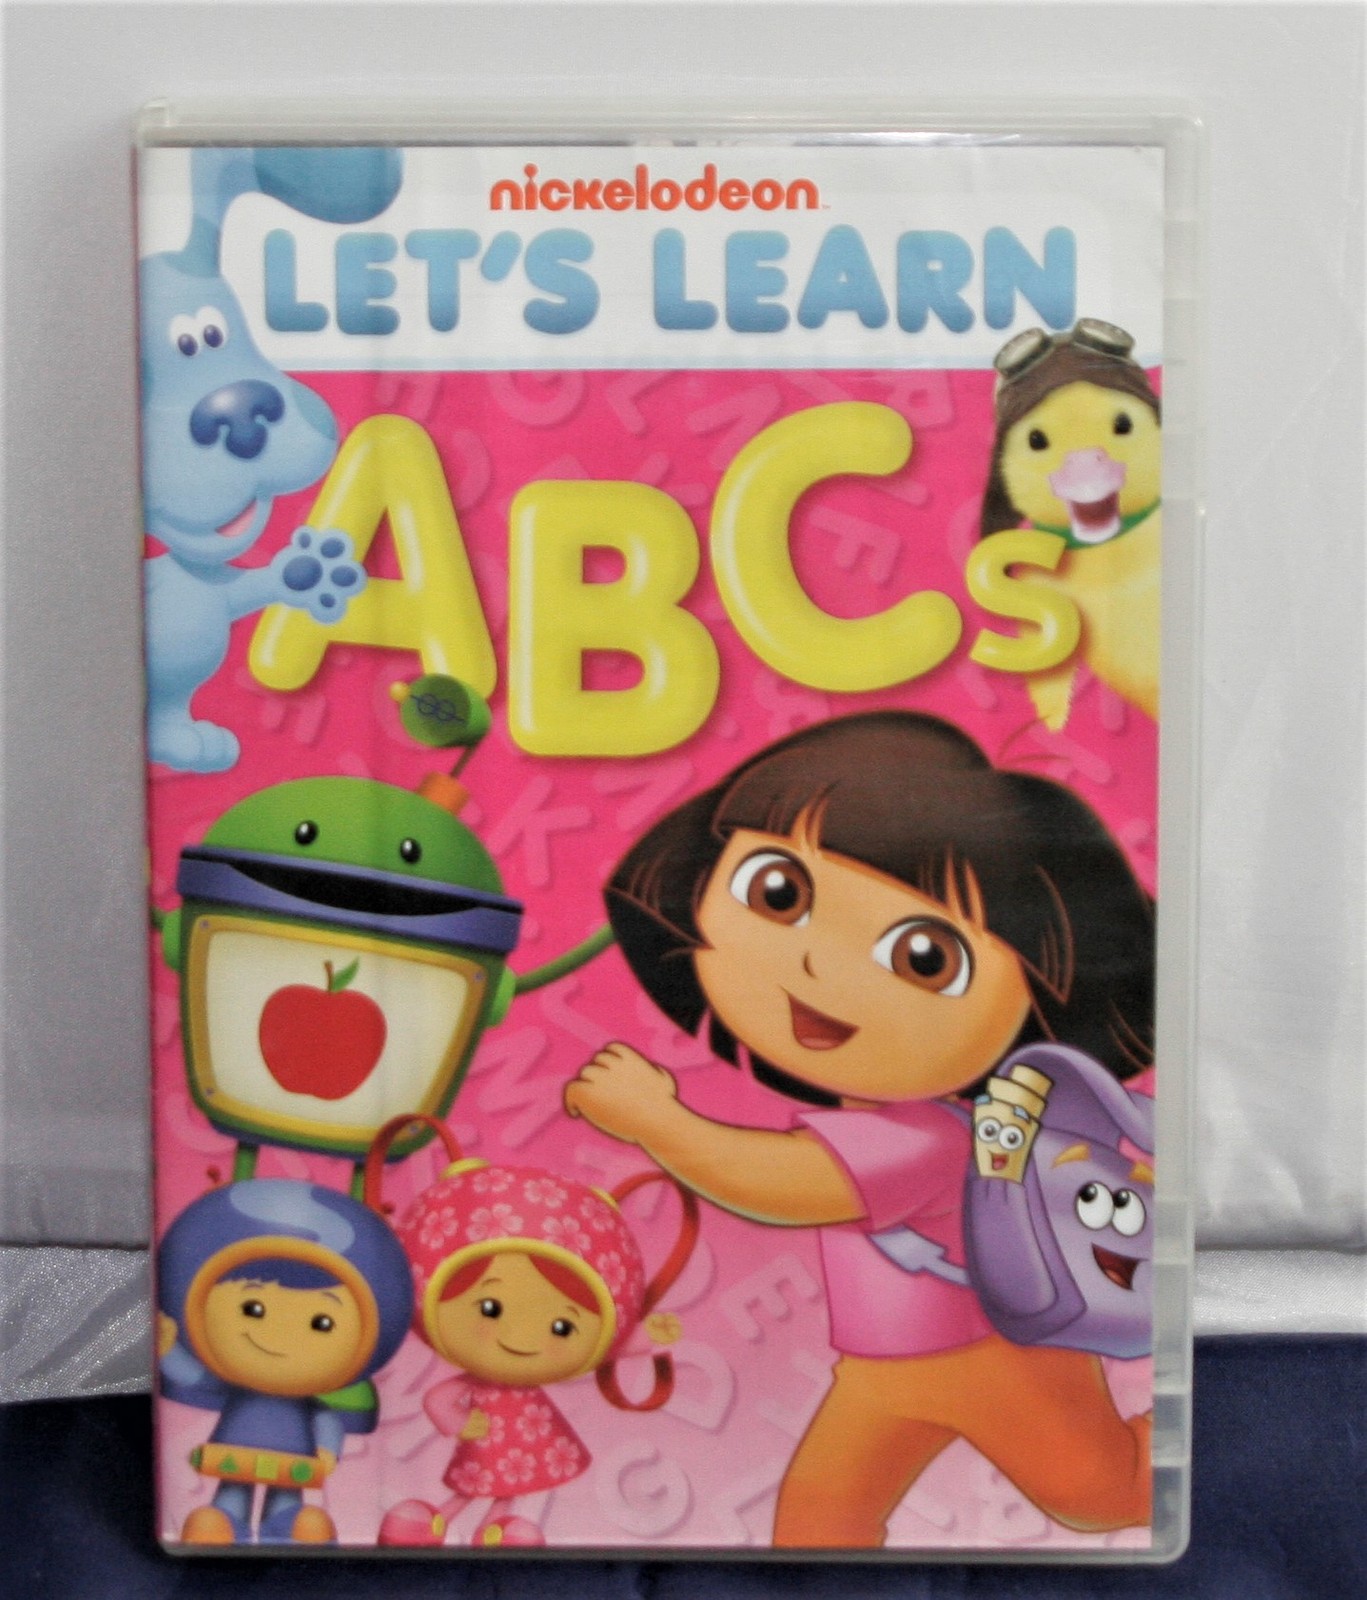 Item image 1. Nickelodeon Let's Learn: ABC DVD. 